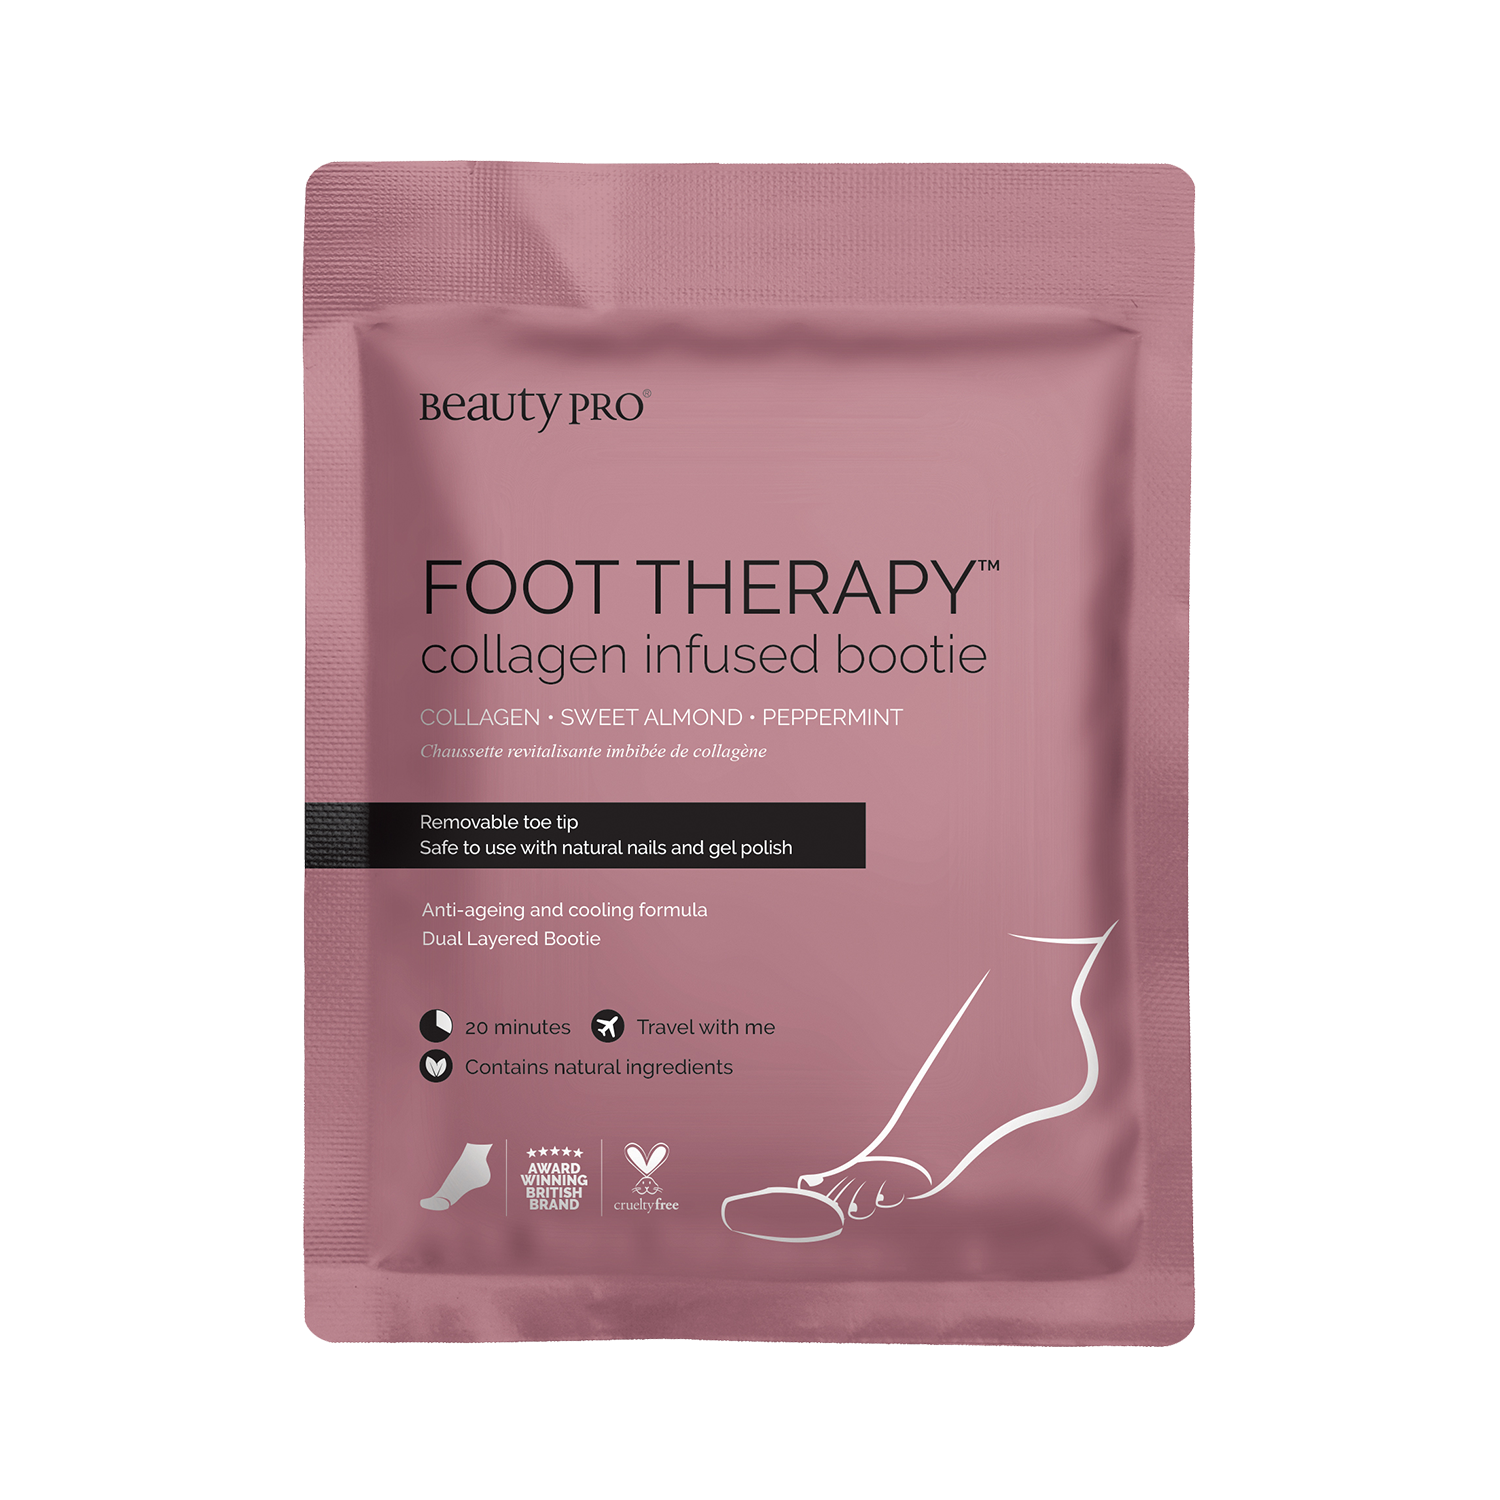 BeautyPro FOOT THERAPY Collagen Infused Bootie with Removable Toe Tip  1